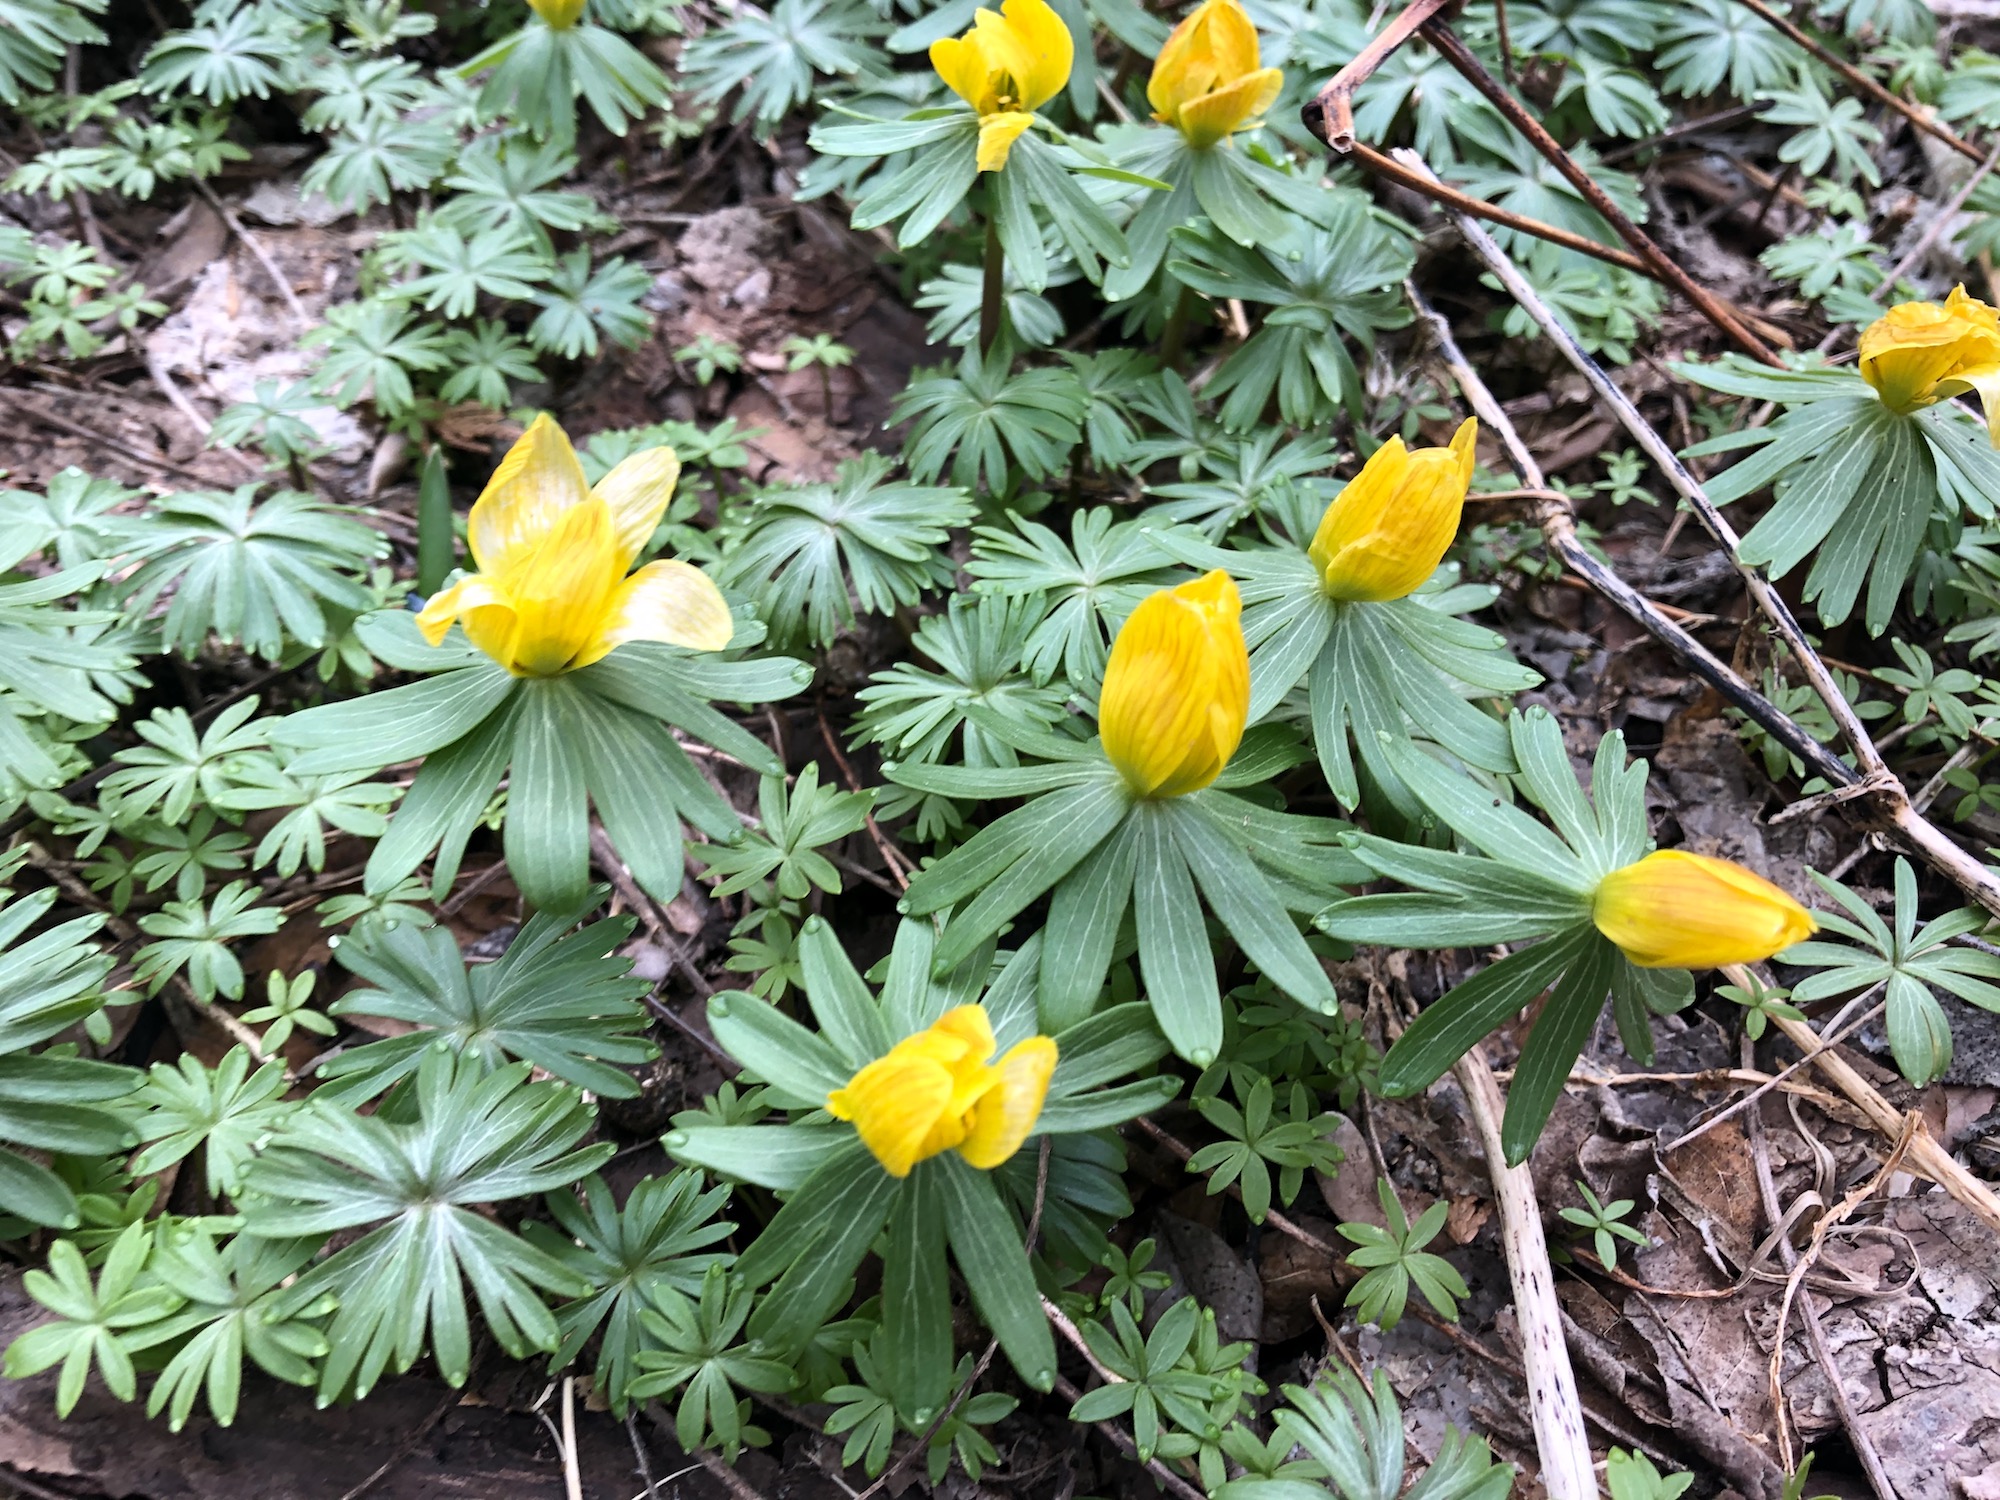 Winter Aconite in yard near the Duck Pond on March 25, 2020.